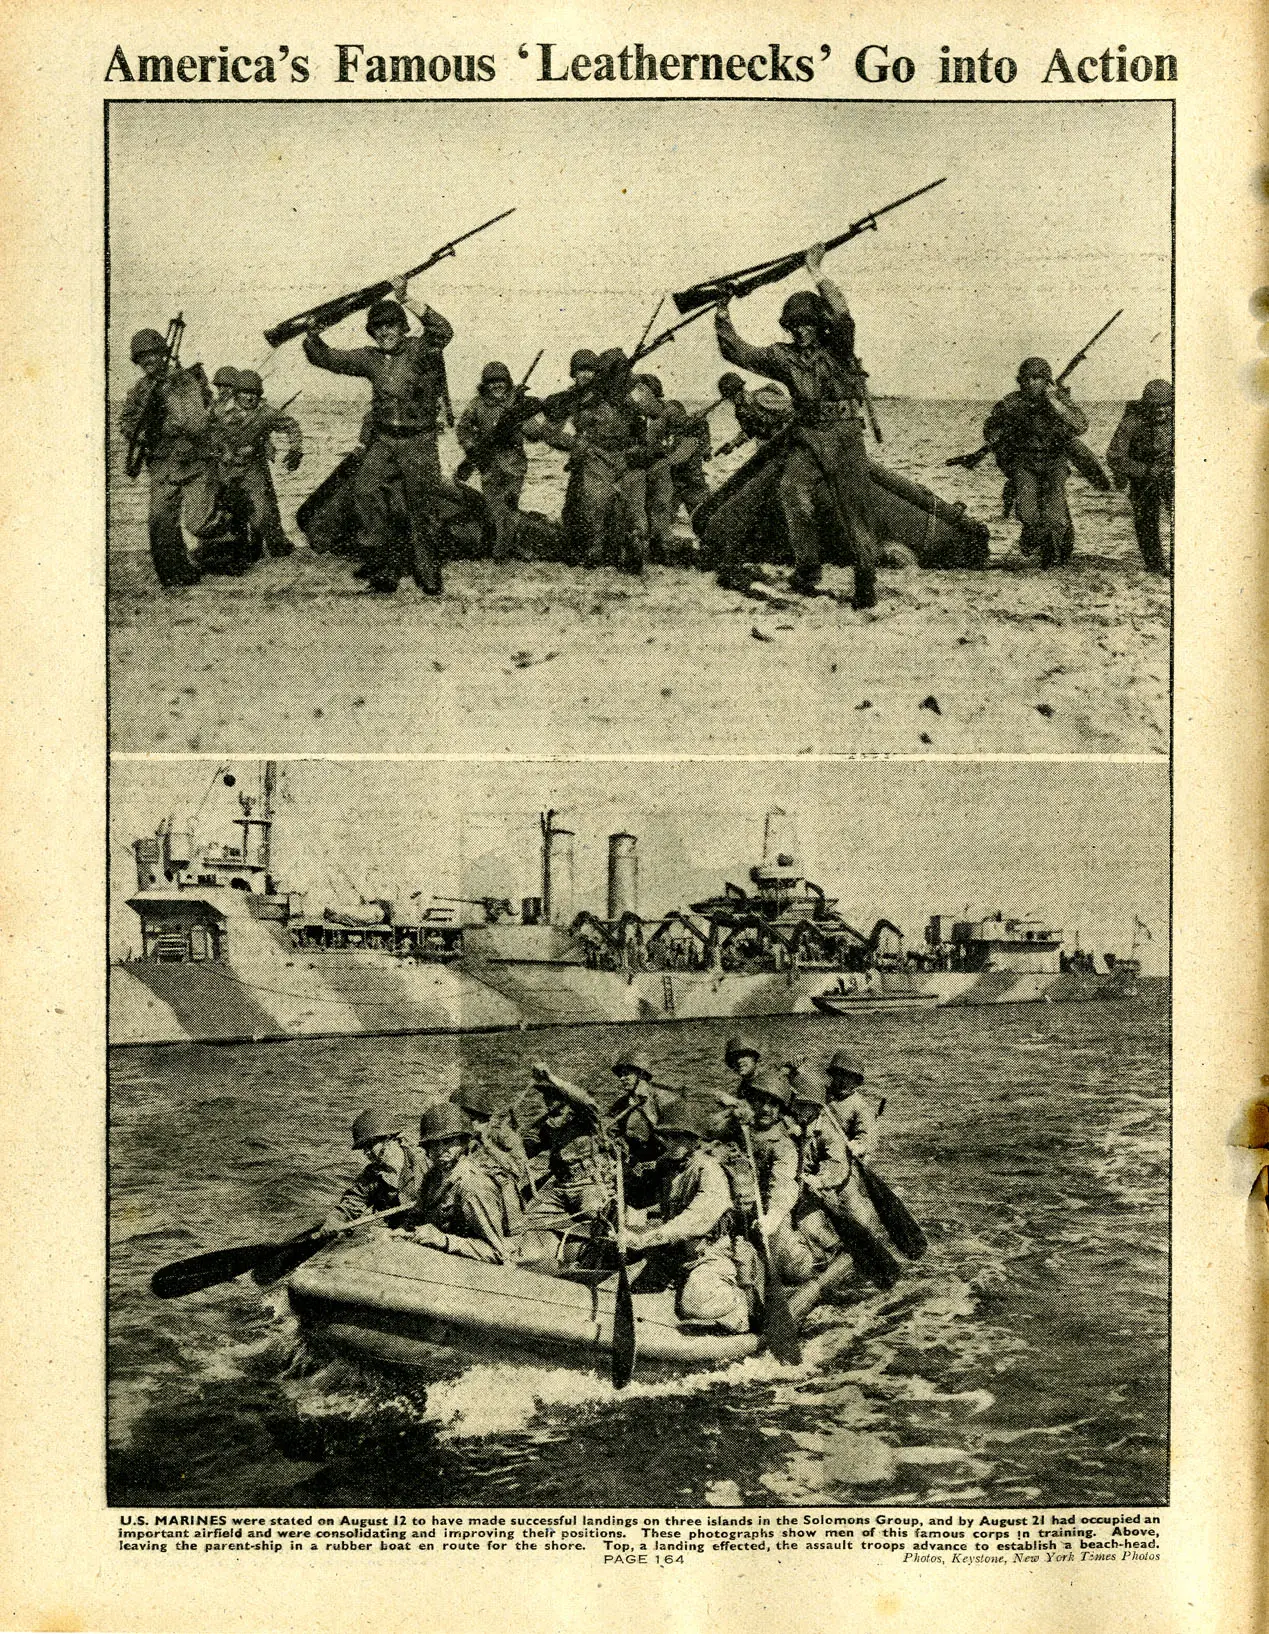 A page of "The War Illustrated" showing two photos of American Marines. The top photo shows Marines disembarking from landing craft and rushing forward with their rifles over their heads. The second photo shows Marines paddling a boat away from a small warship.